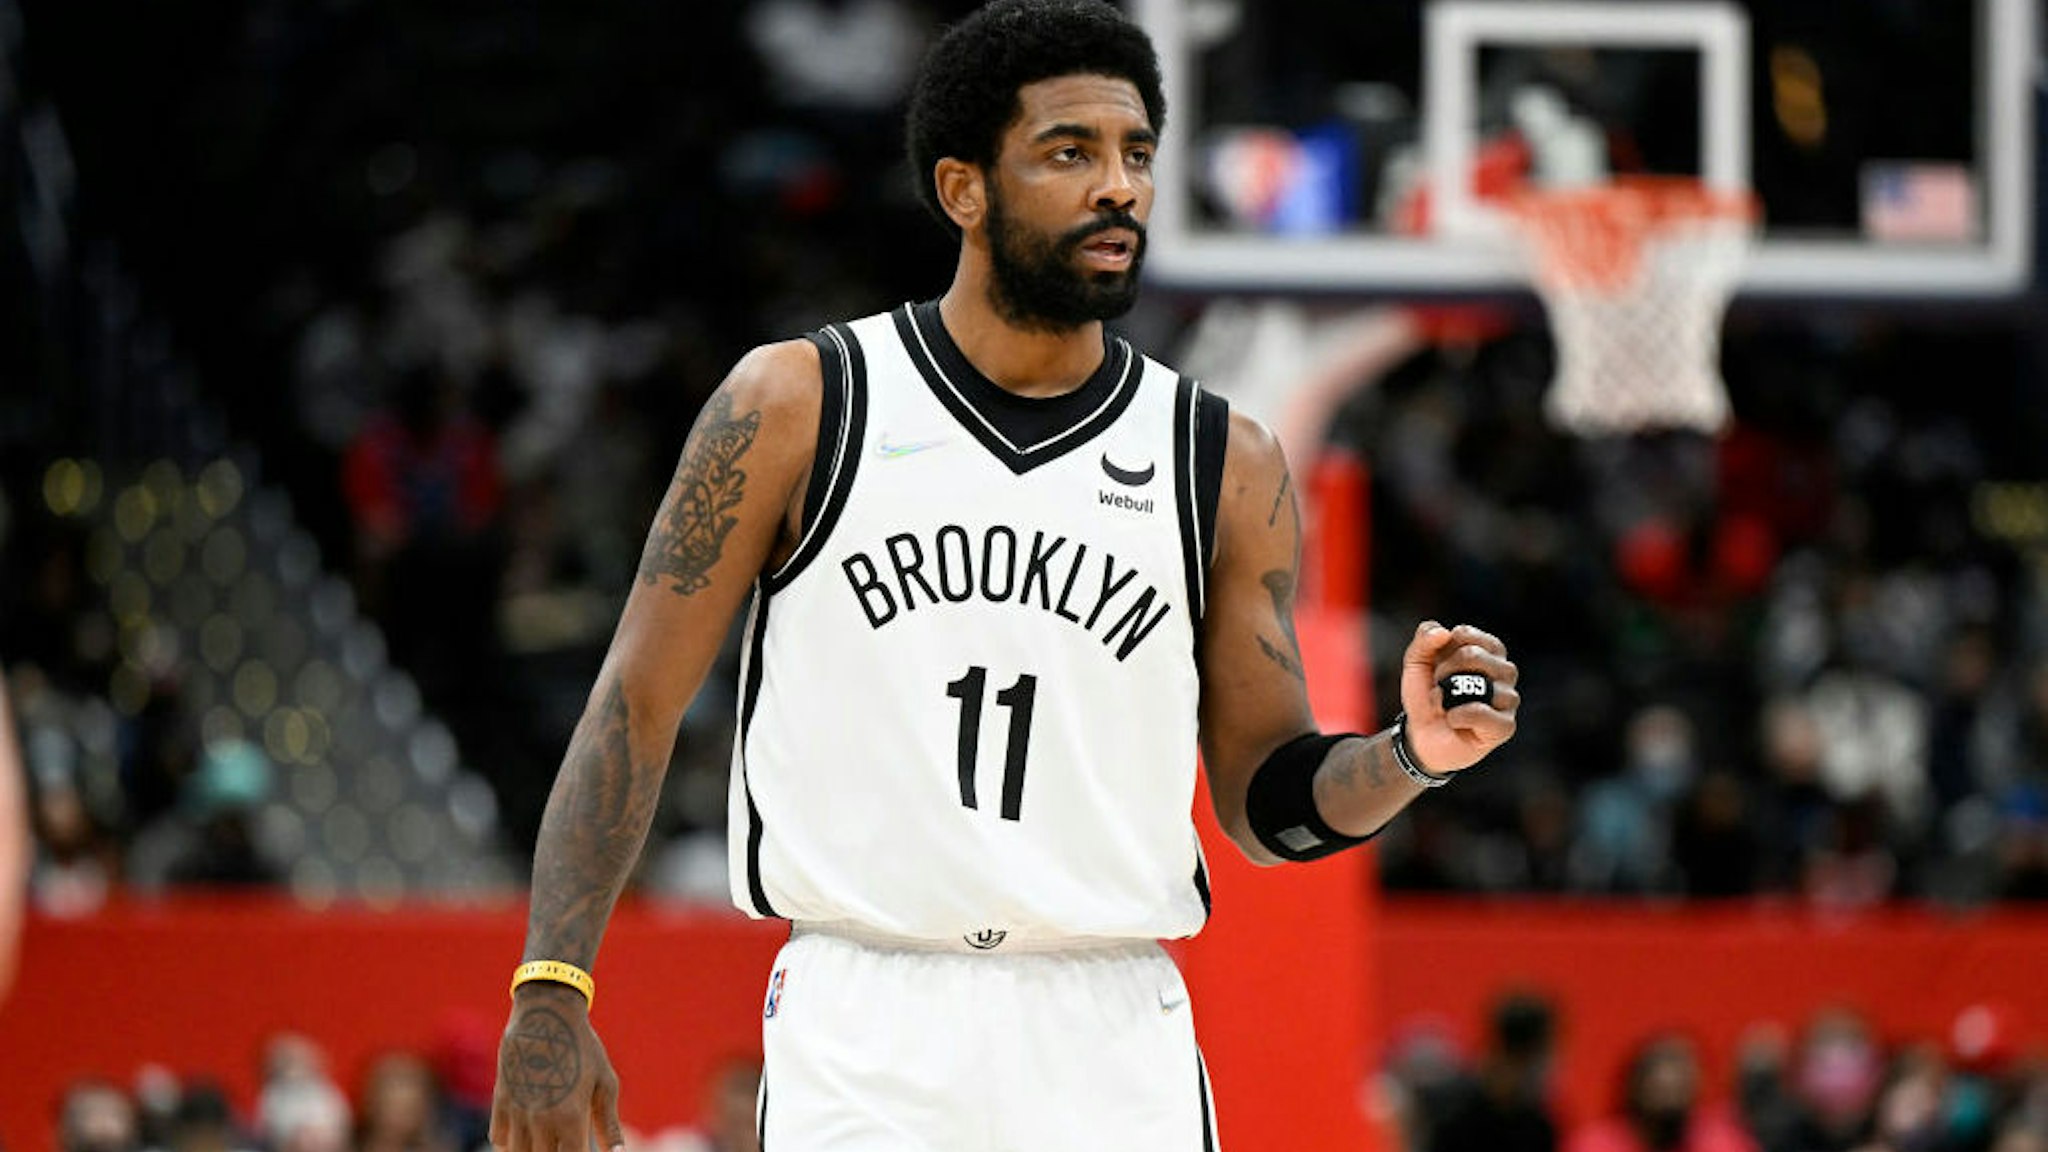 WASHINGTON, DC - FEBRUARY 10: Kyrie Irving #11 of the Brooklyn Nets gestures during the second quarter against the Washington Wizards at Capital One Arena on February 10, 2022 in Washington, DC. NOTE TO USER: User expressly acknowledges and agrees that, by downloading and or using this photograph, User is consenting to the terms and conditions of the Getty Images License Agreement. (Photo by Greg Fiume/Getty Images)